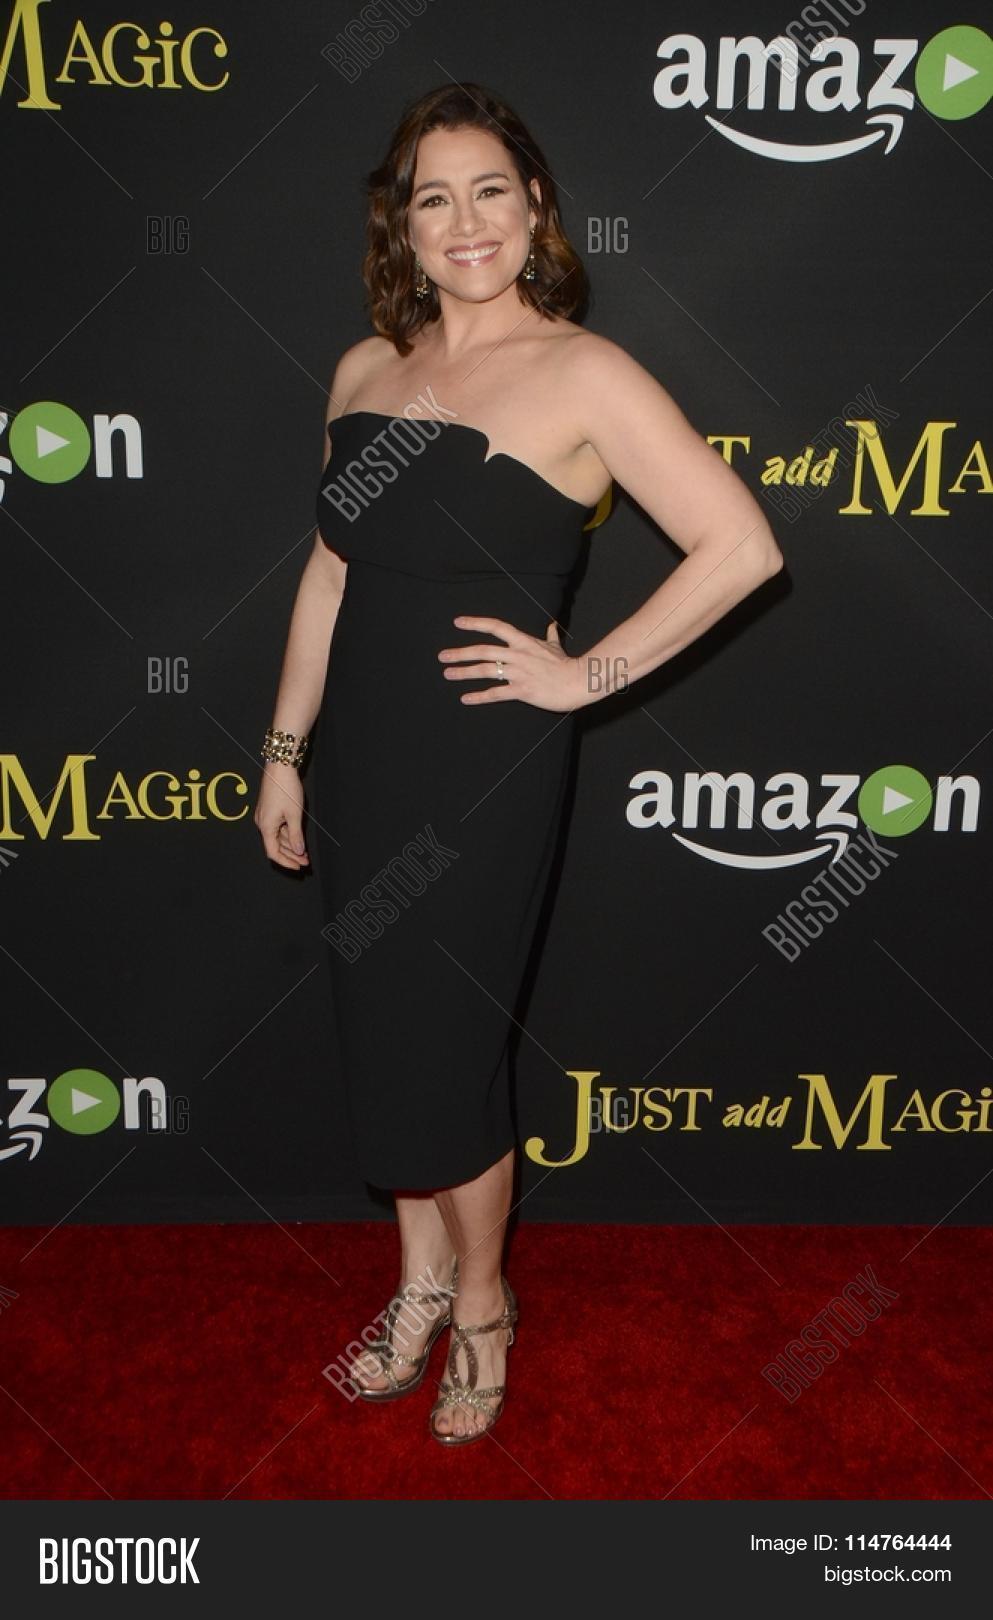 Catia Ojeda on the red carpet at the "Just Add Magic" premiere